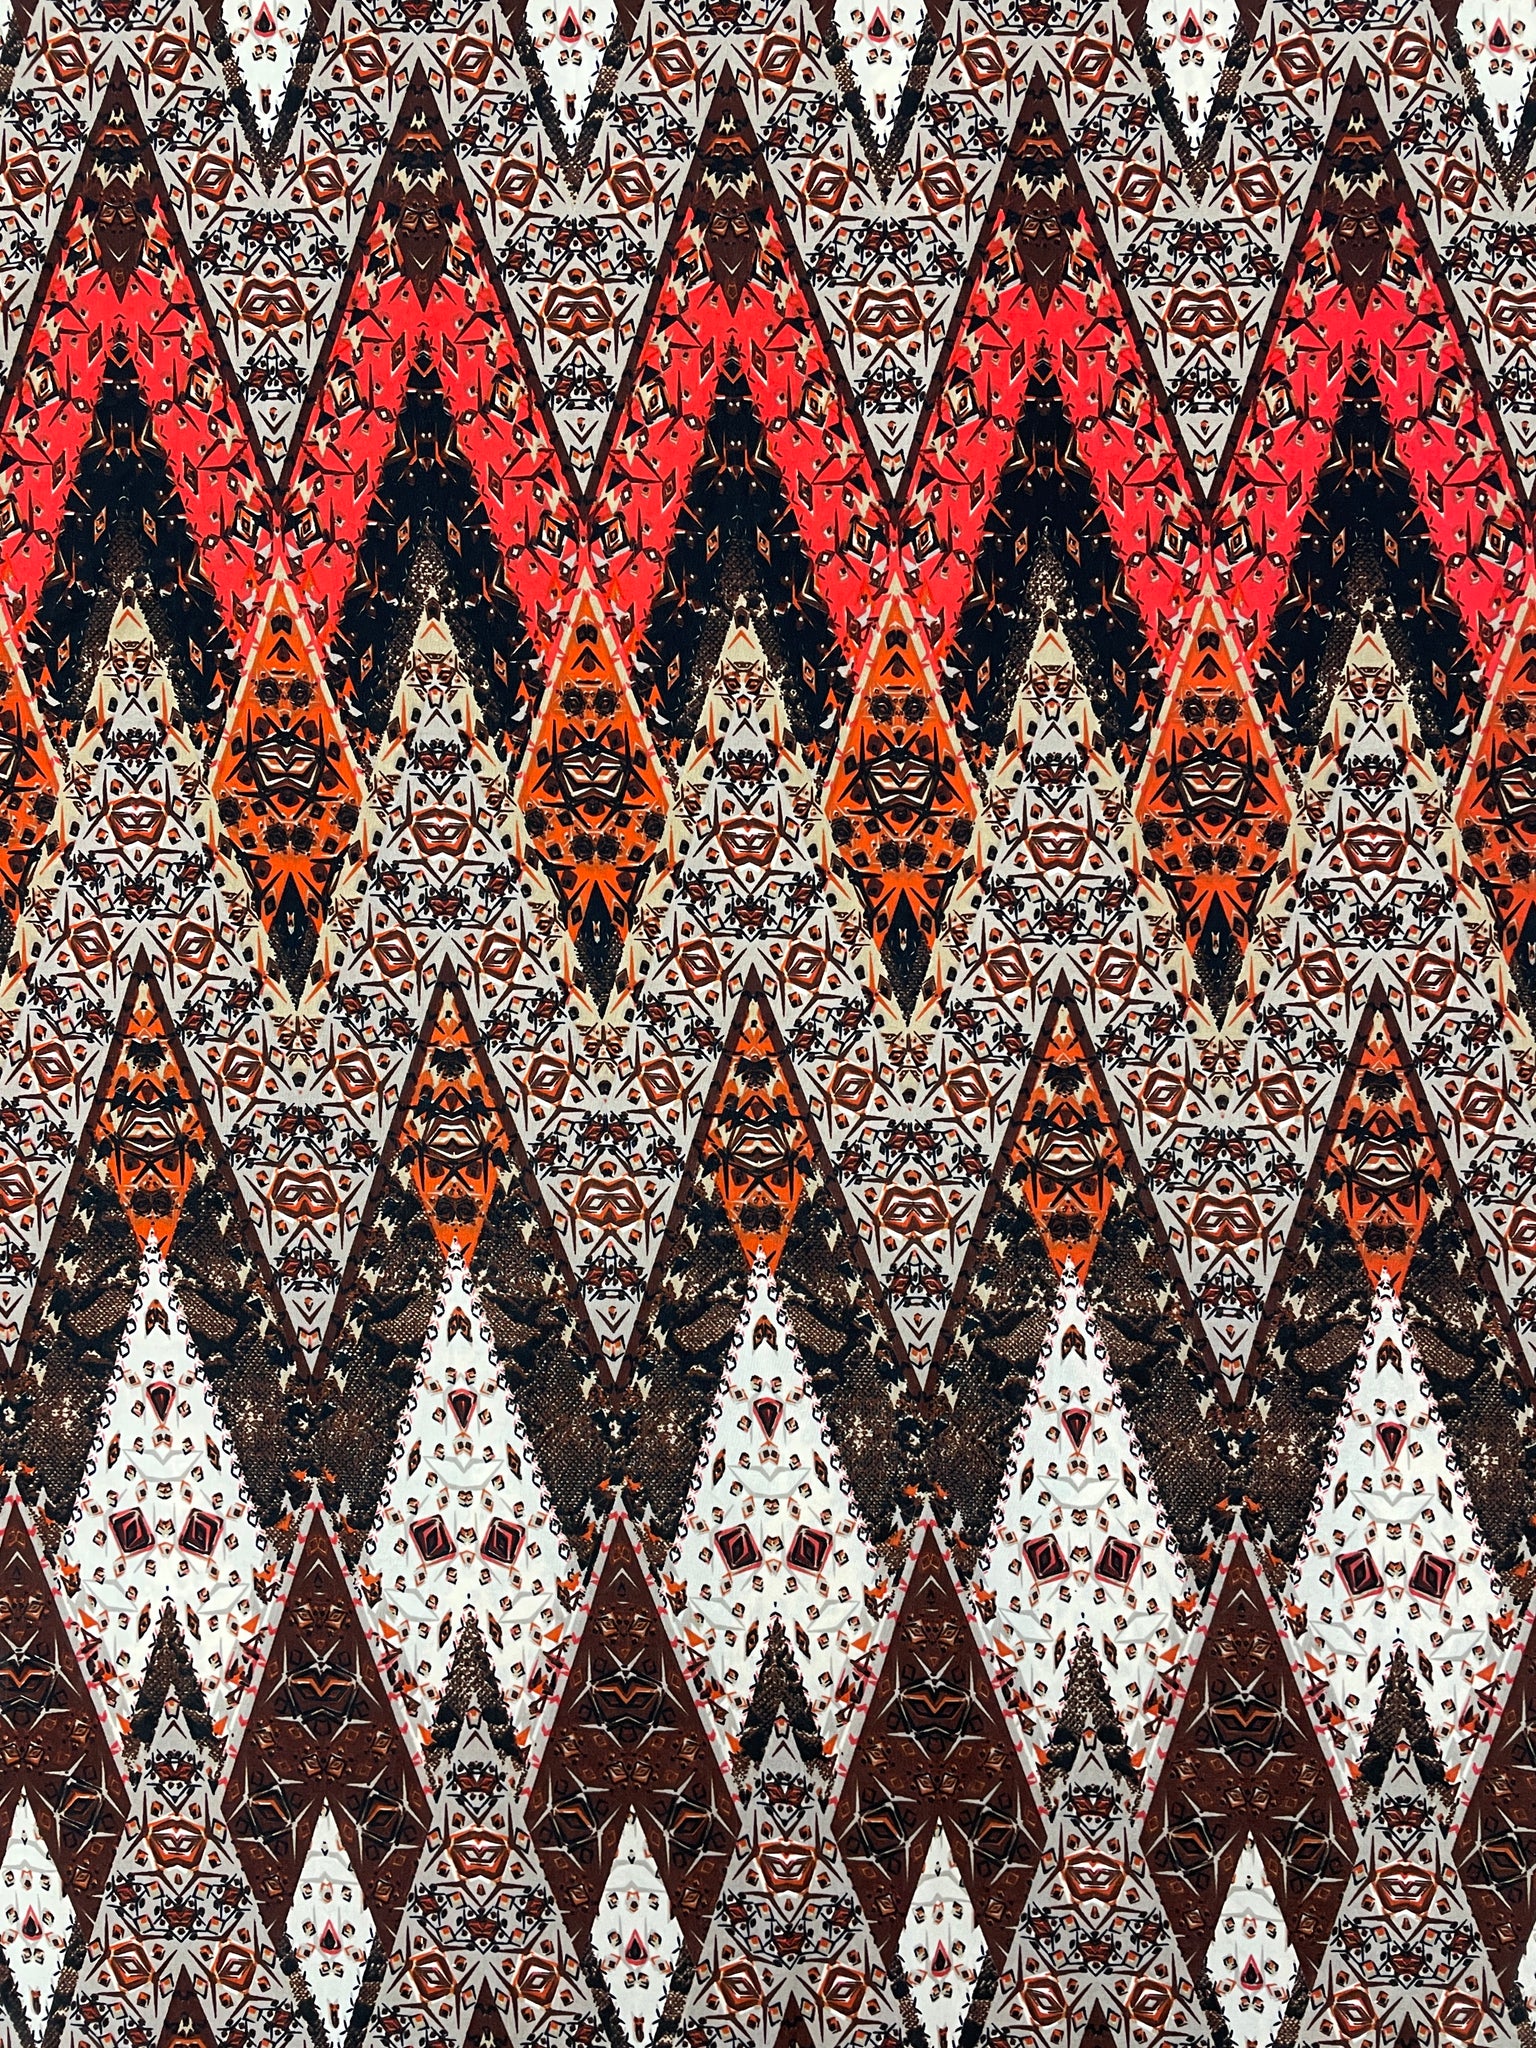 Polyester Stretch Knit - Orange, Red and Off White Diamonds with Geometrics